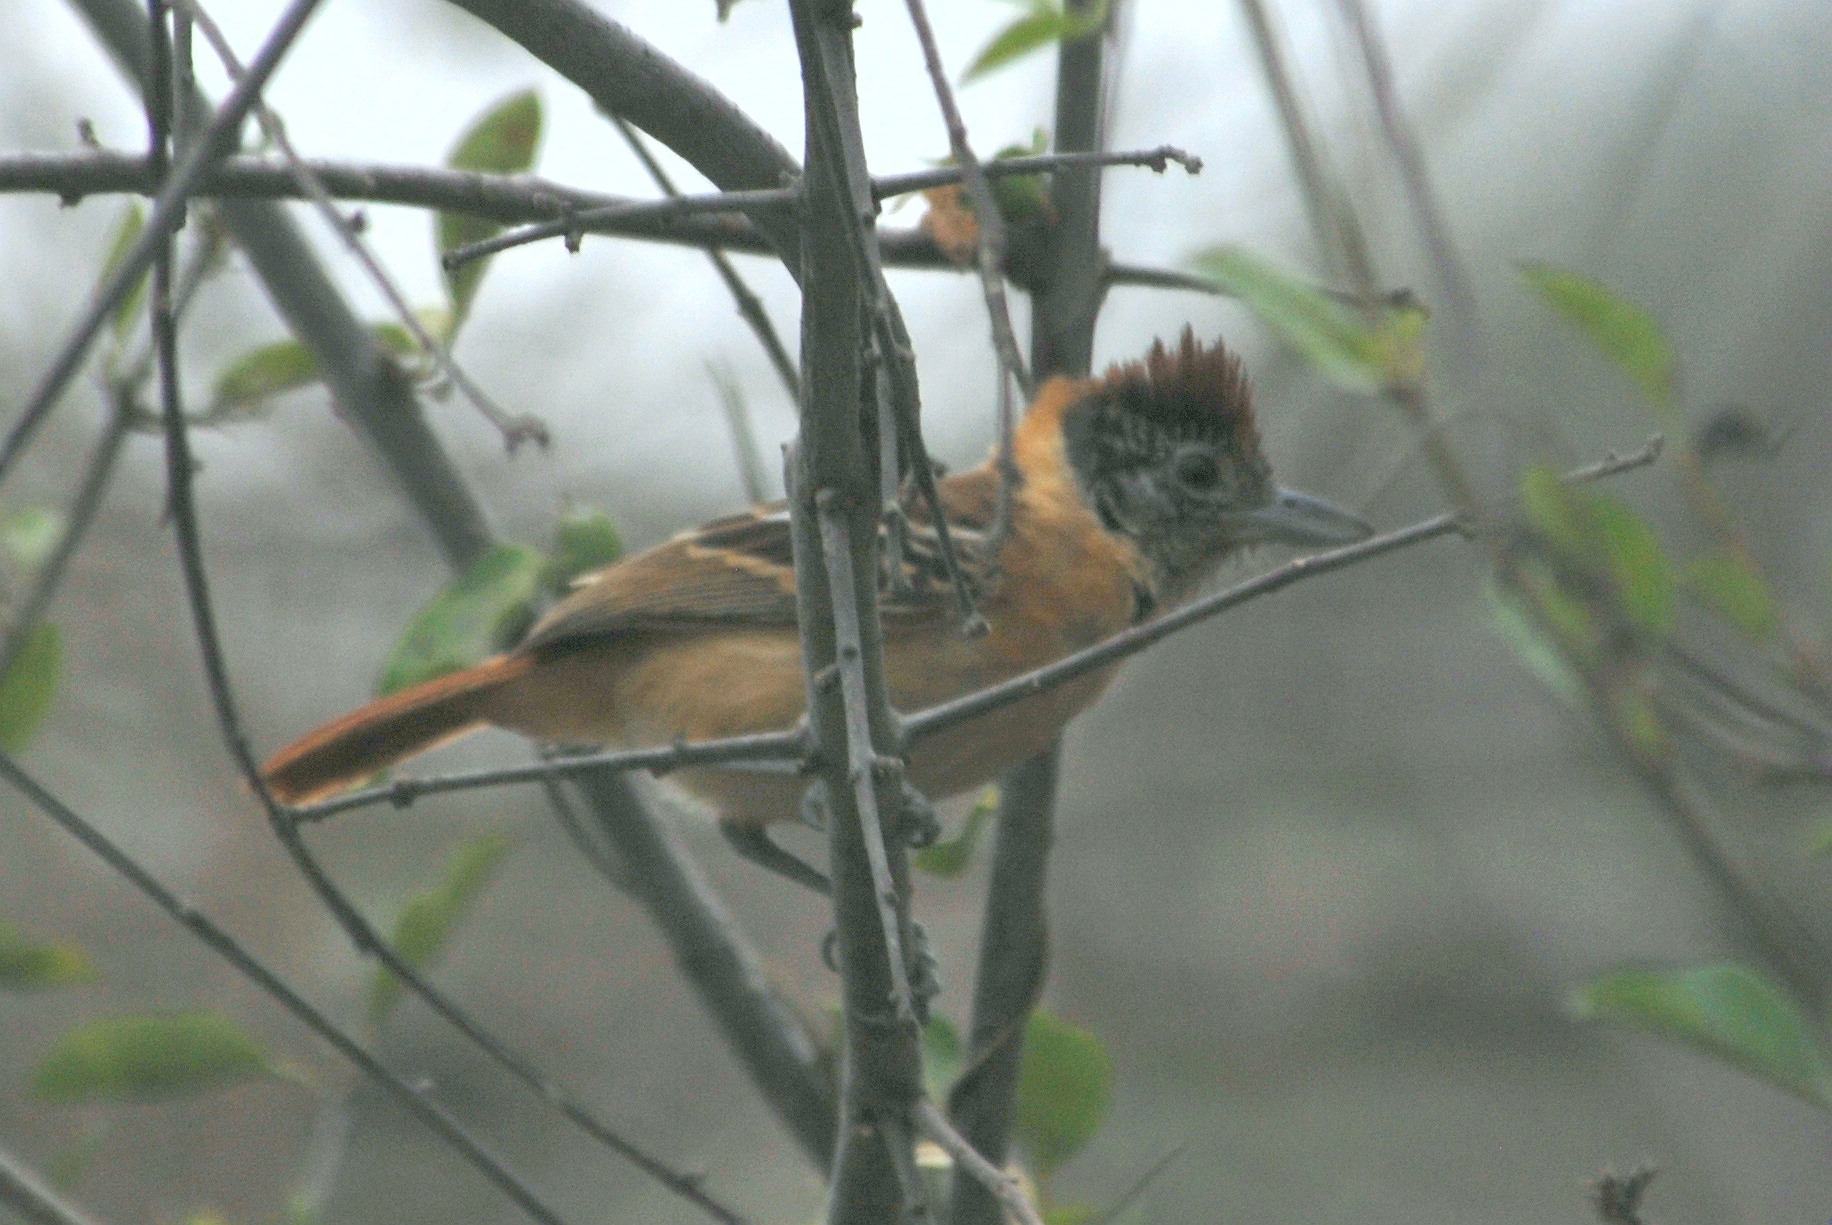 Click picture to see more Collared Antshrikes.